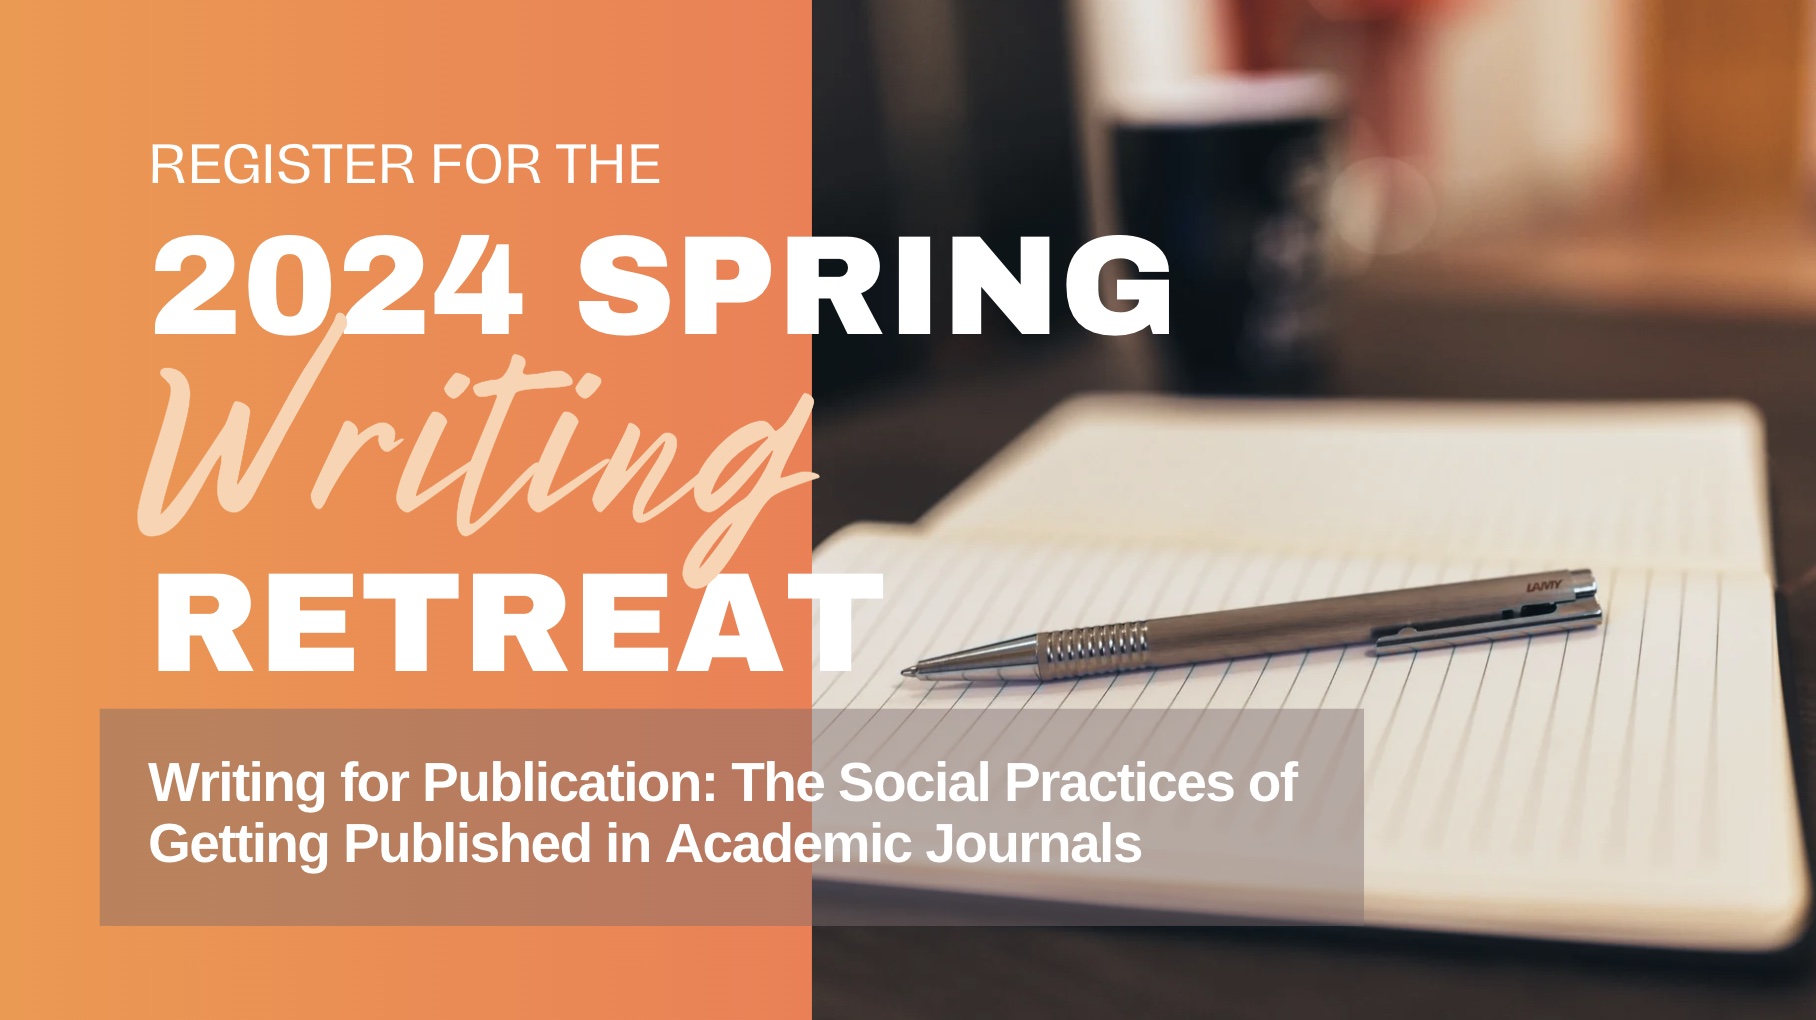 Register for the 2024 Spring Writing Workshop. Writing for Publication: The Social Practices of Getting Published in Academic Journals notepad open and pen on top.